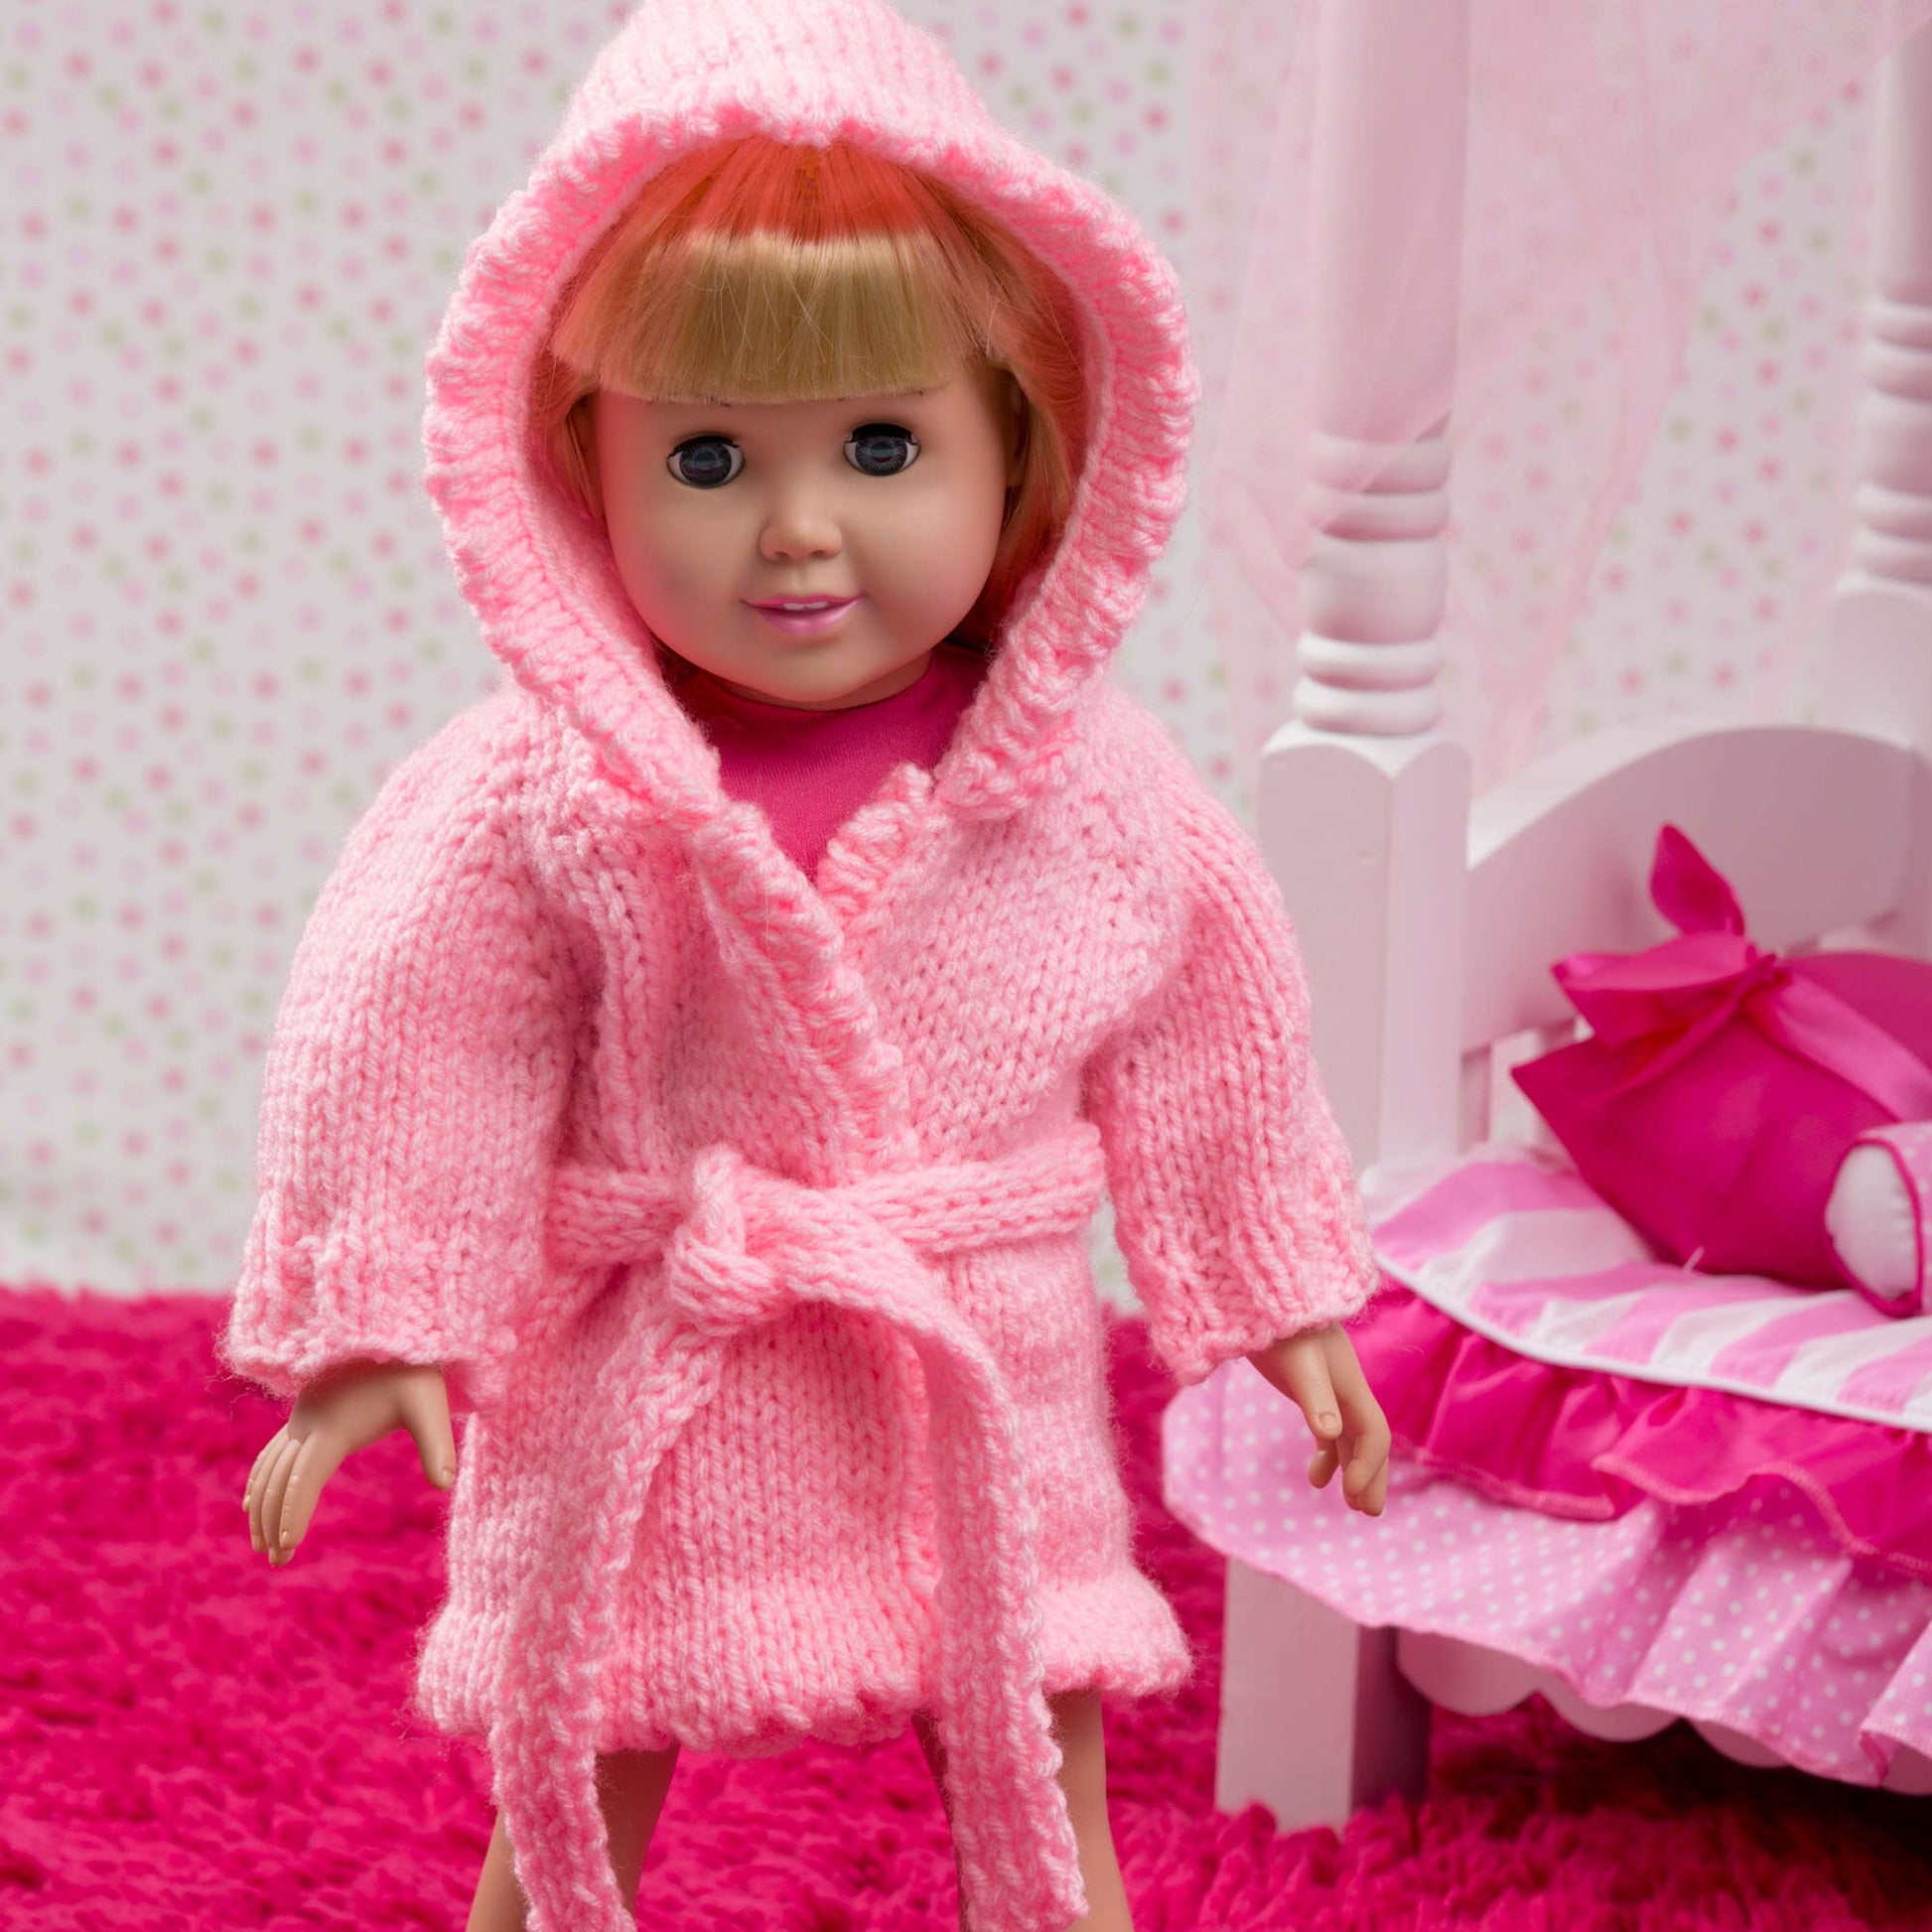 Free Red Heart Knit Doll Robe And Bunny Slippers Pattern